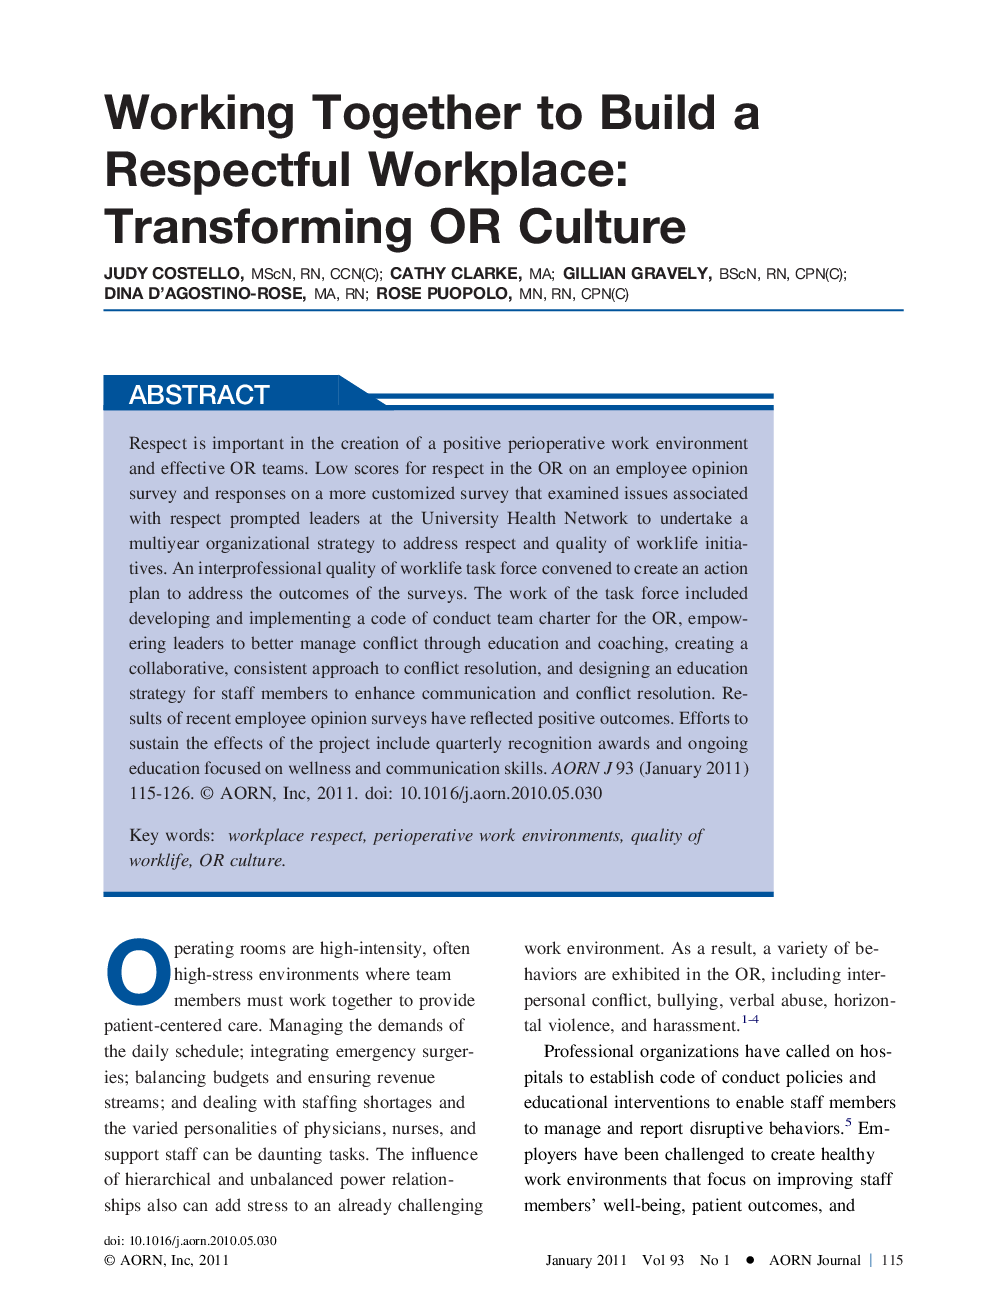 Working Together to Build a Respectful Workplace: Transforming OR Culture